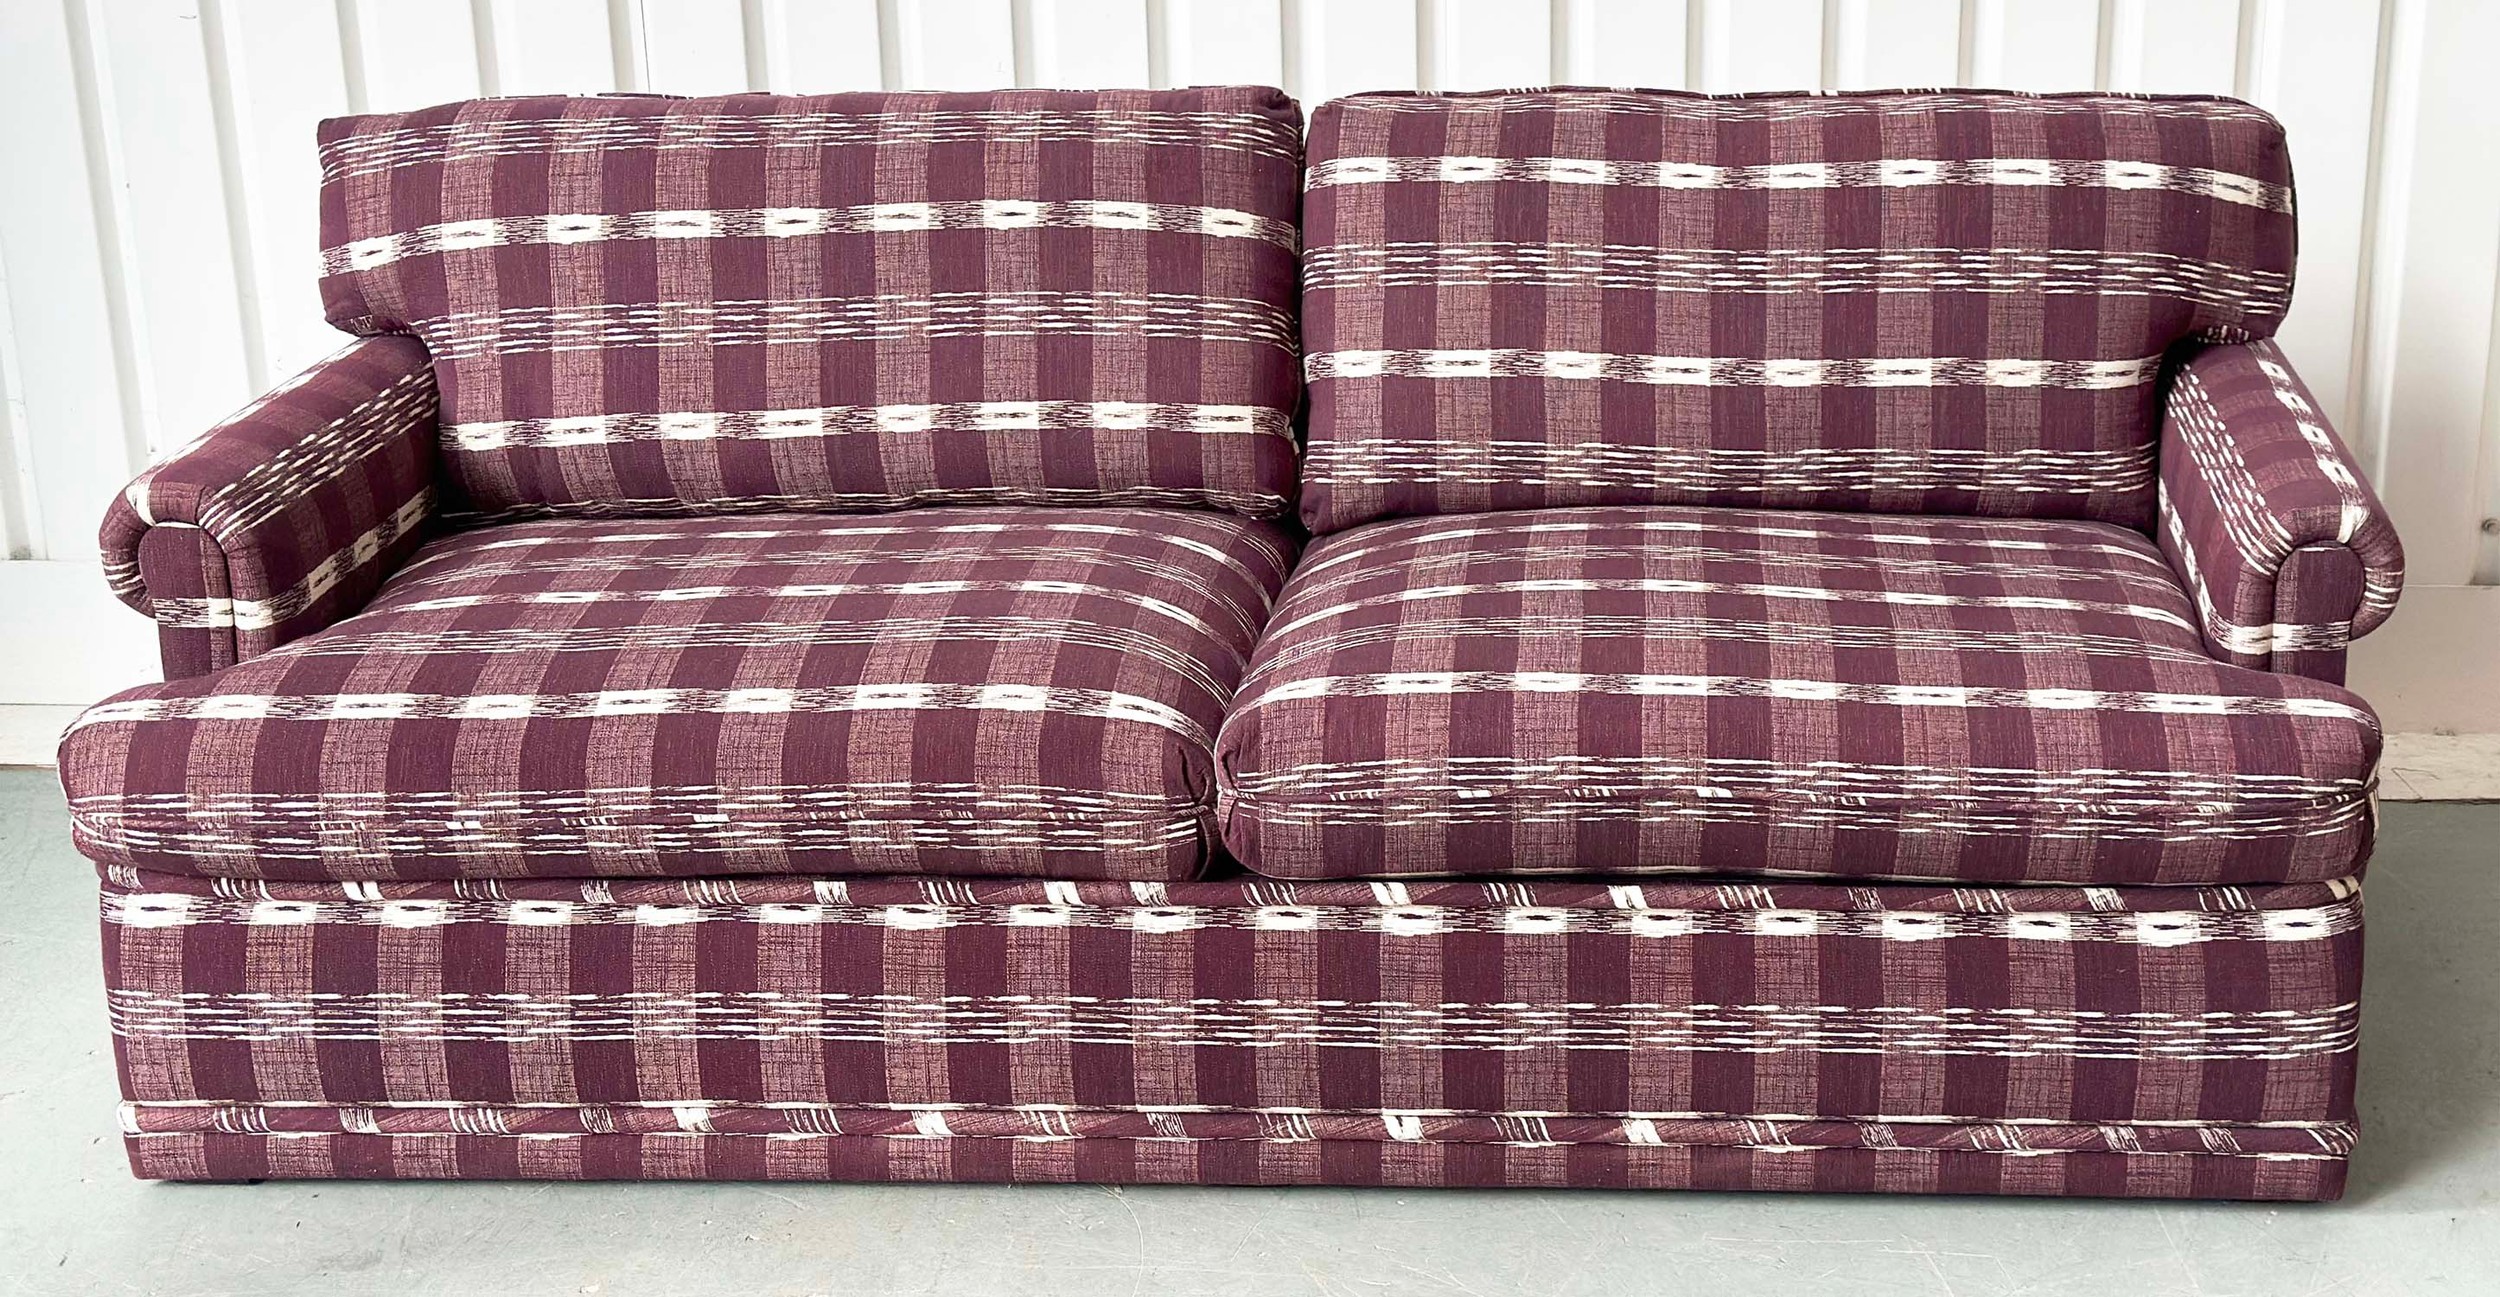 SOFA, Swedish check purple/white upholstery with scroll arms, 203cm W. - Image 3 of 18